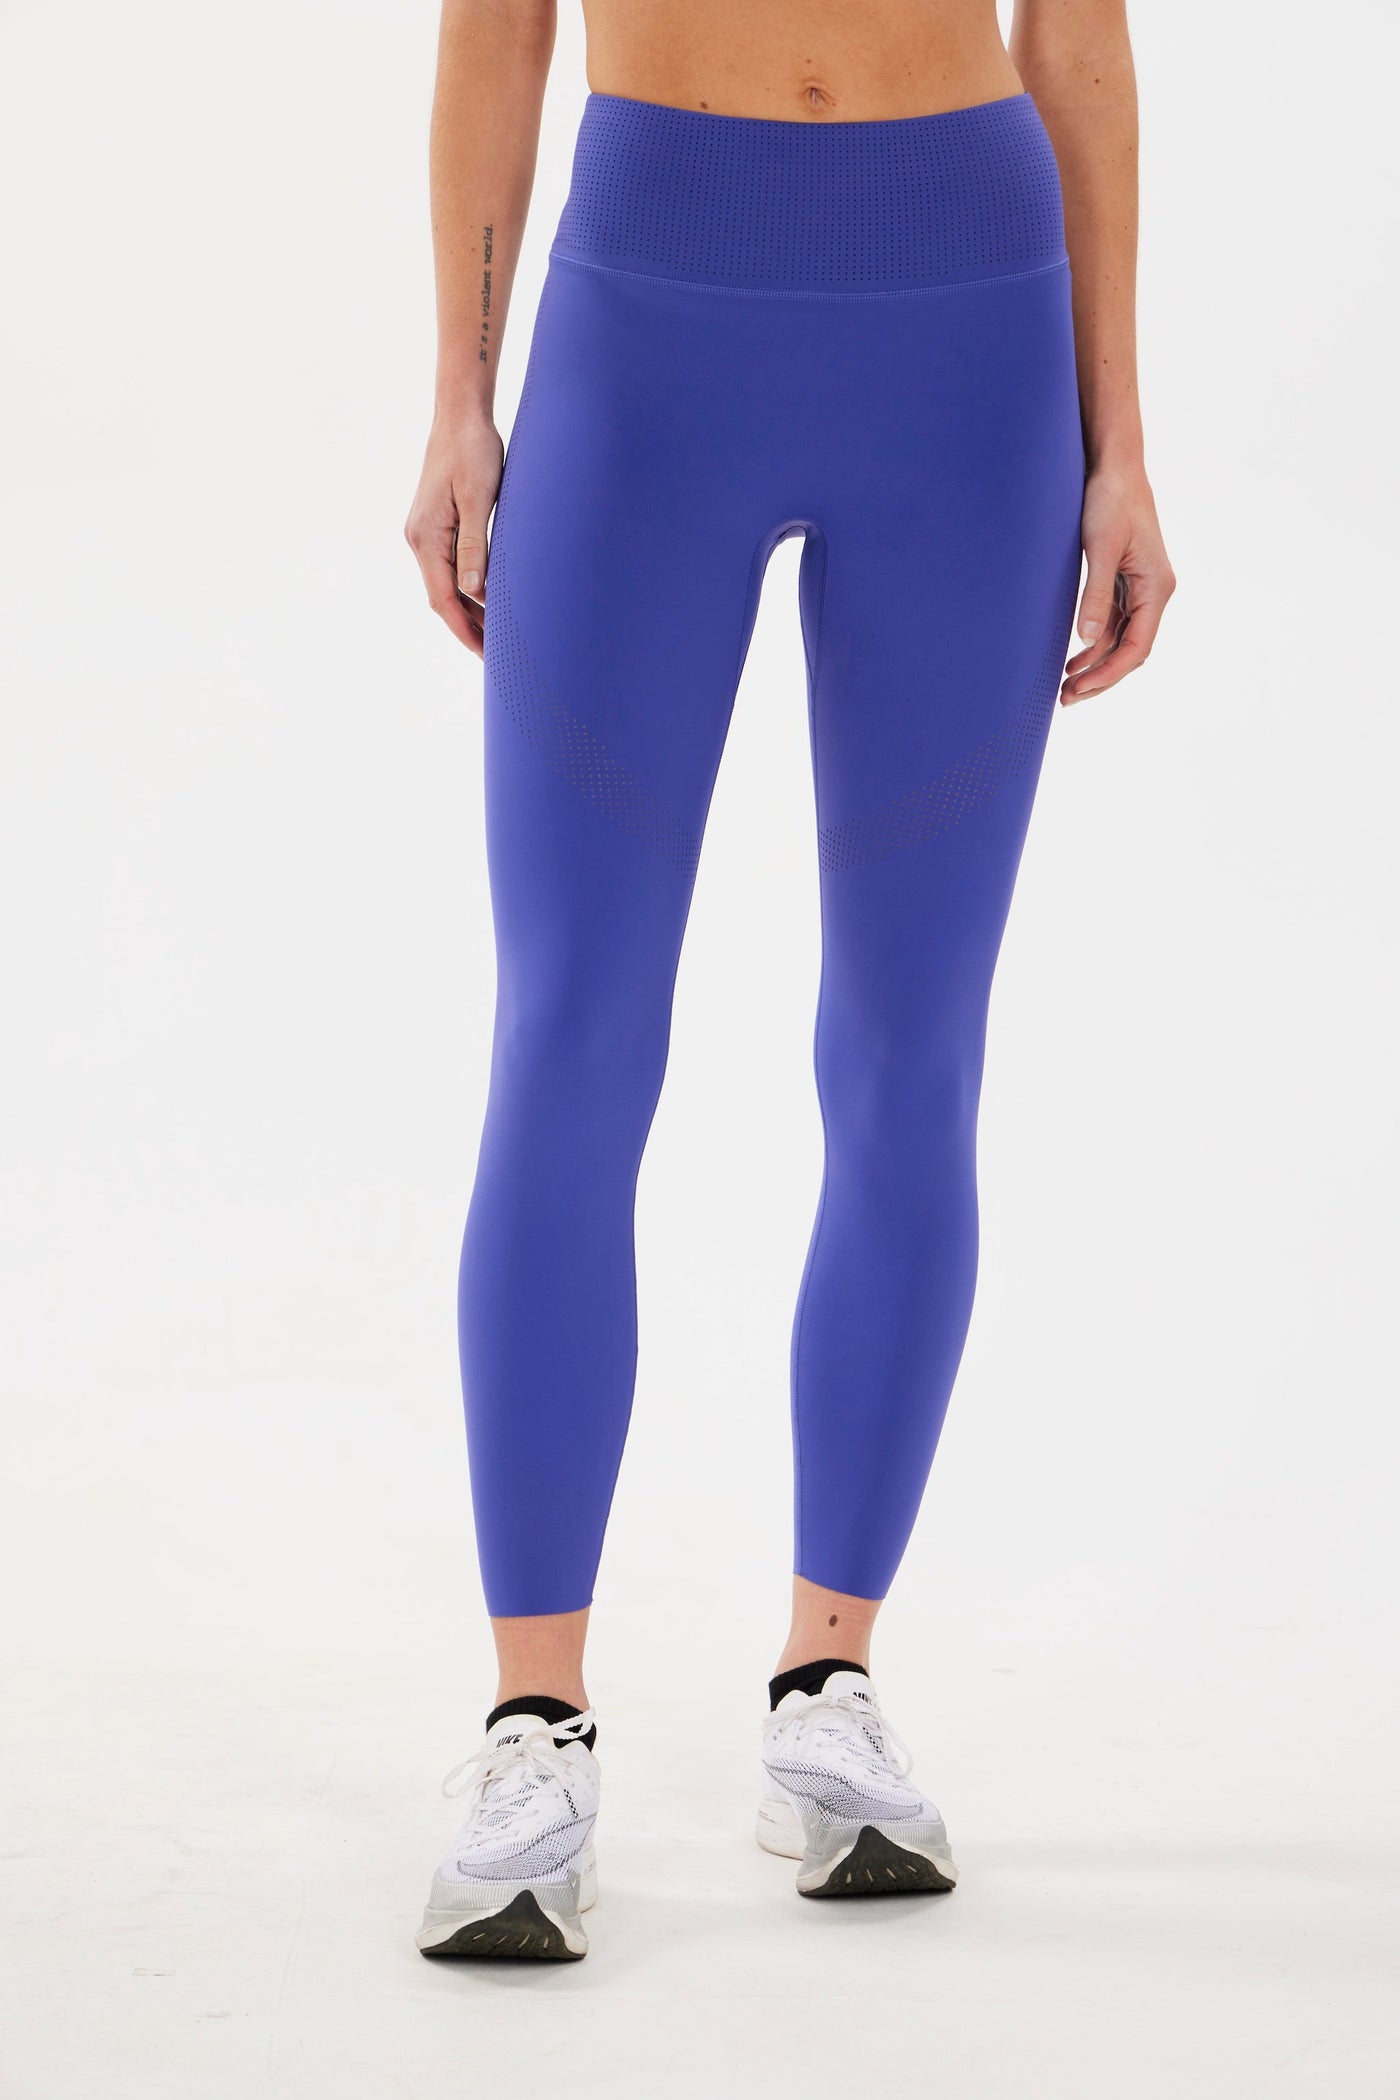 ALRN 7/8 PERFORATED TIGHT